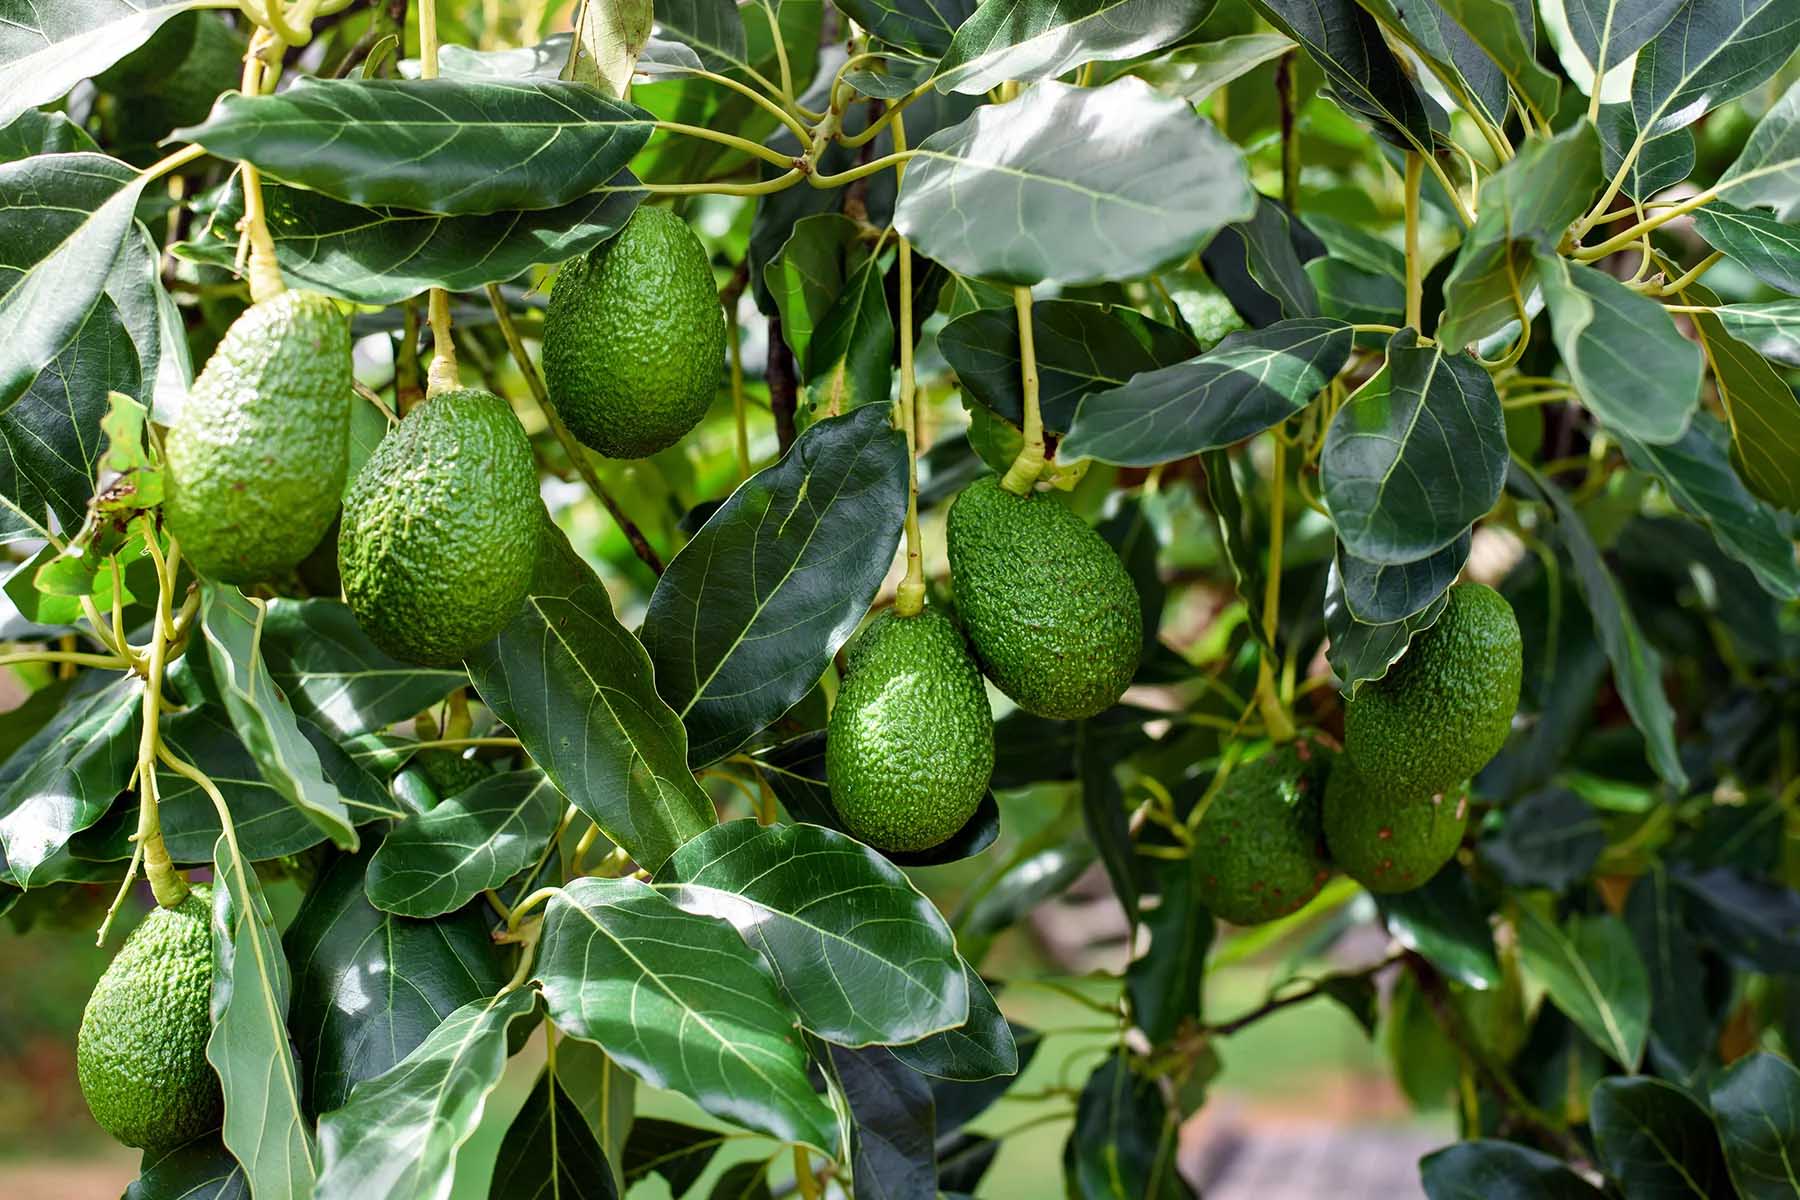 Fun fact: both the English and Spanish words for 'avocado' come from Nahuatl